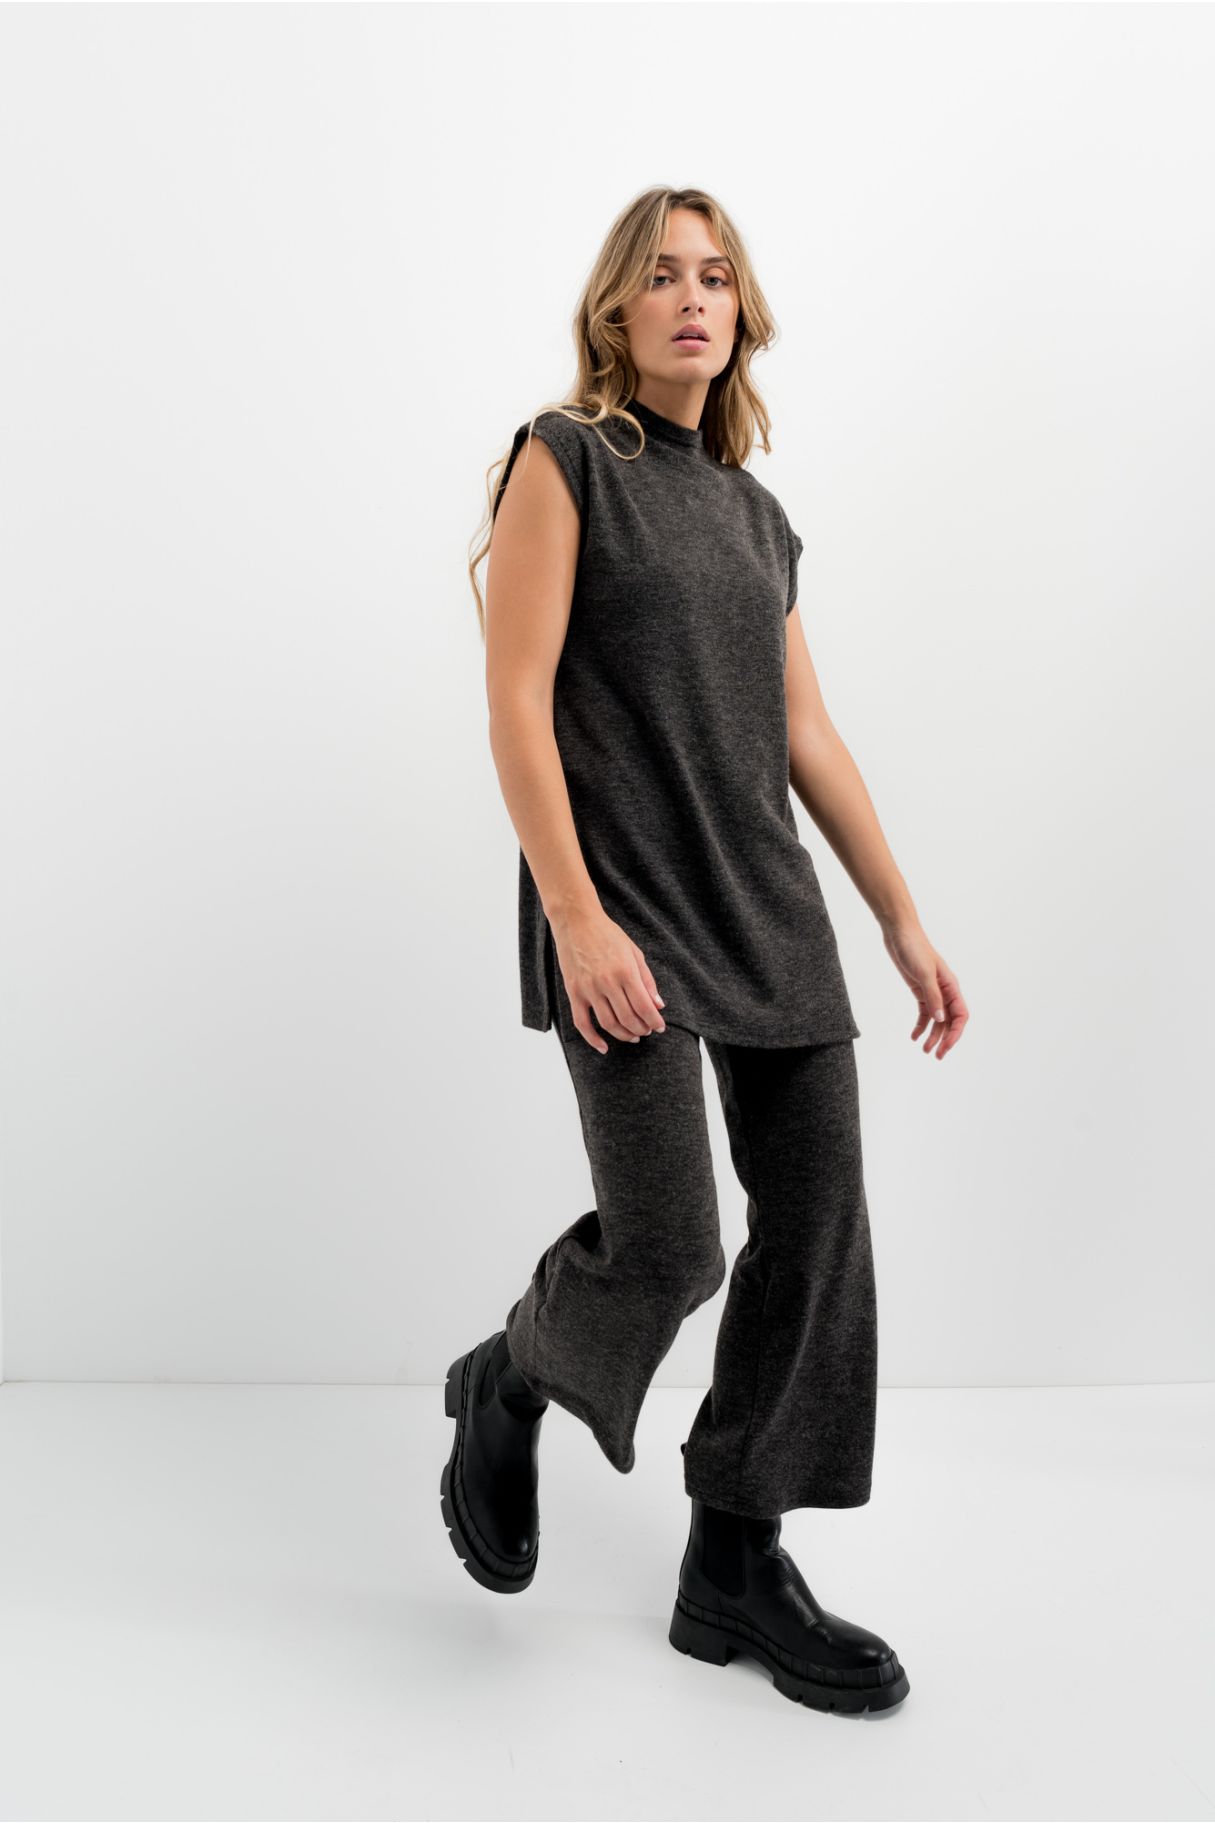 KNIT TUNIC-STYLE TOP WITH VENTS